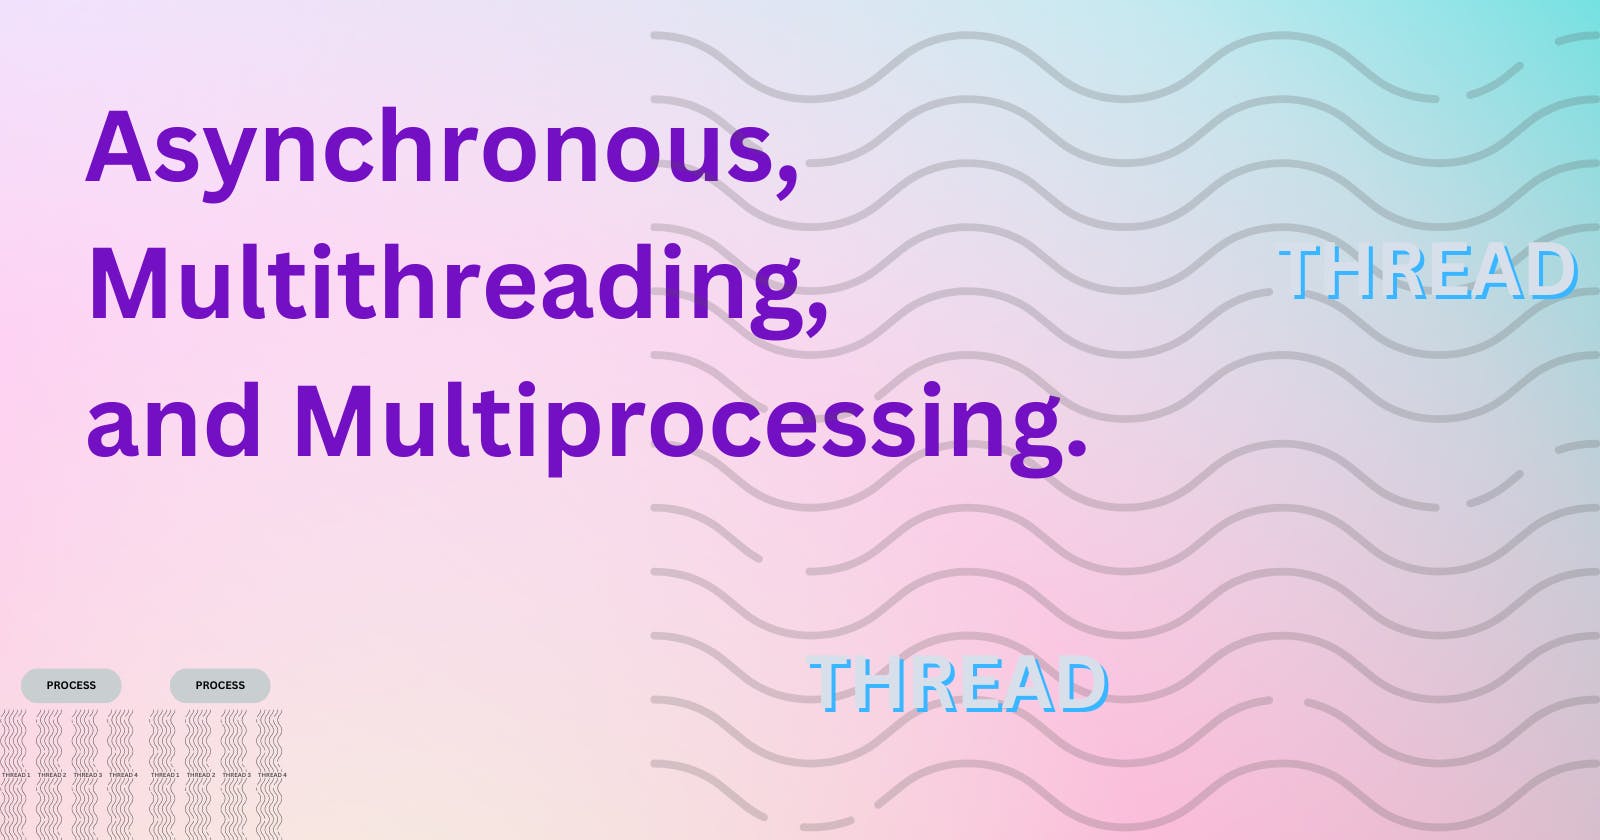 Asynchronous, Multithreading, and Multiprocessing.